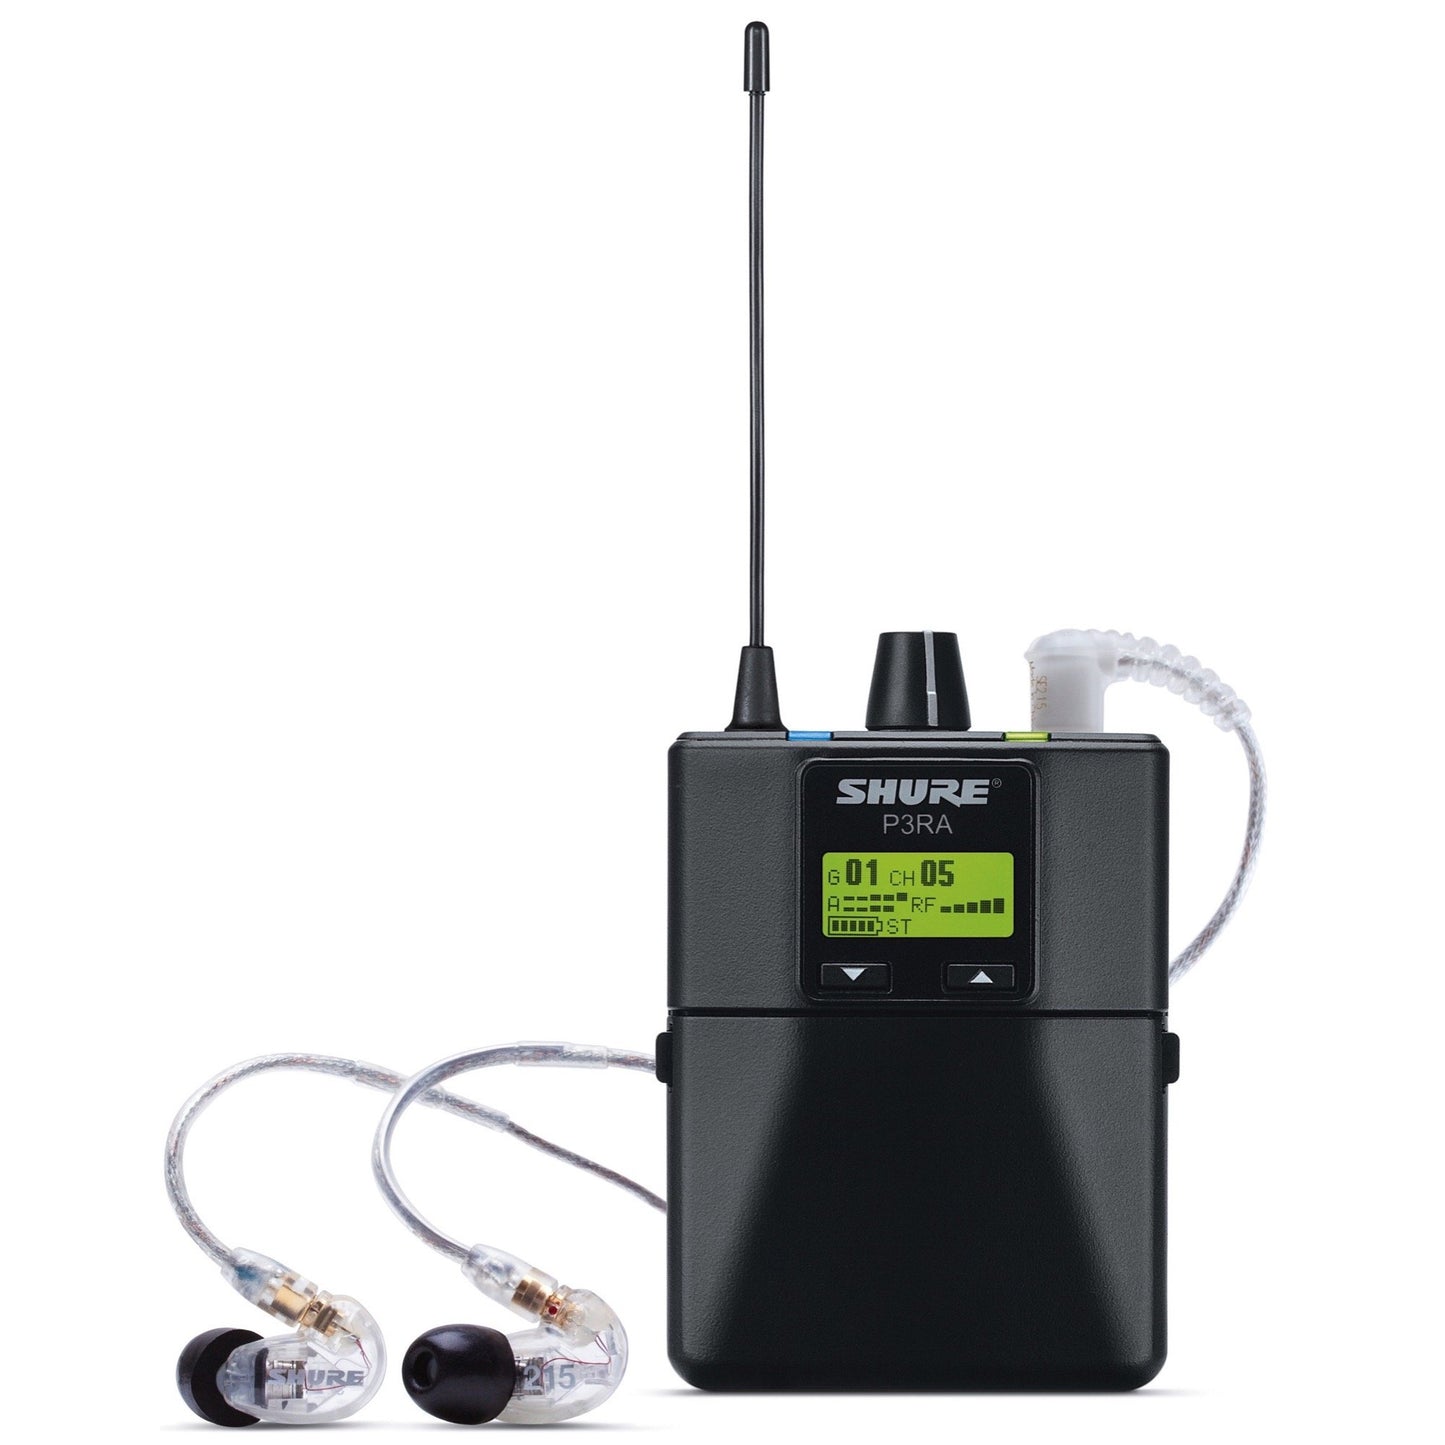 Shure PSM 300 IEM Wireless In-Ear Monitor System with SE215CL Earphones, Band H20